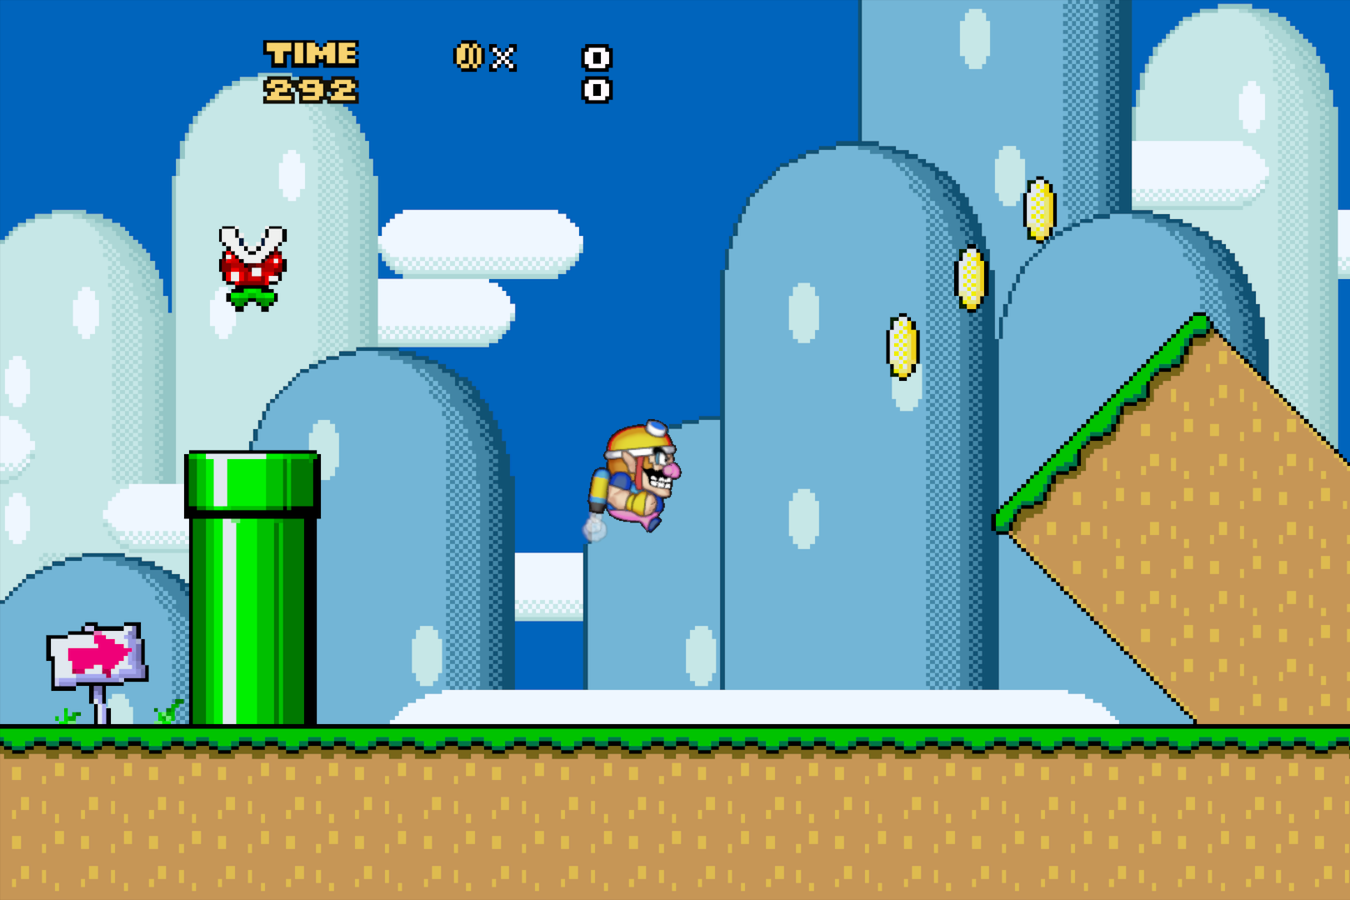 A little blue-and-yellow man flies in the air across a screen with blue skies, hills, and a green pipe behind him. In front of him are three yellow coins and a leaning green-and-brown tower.  